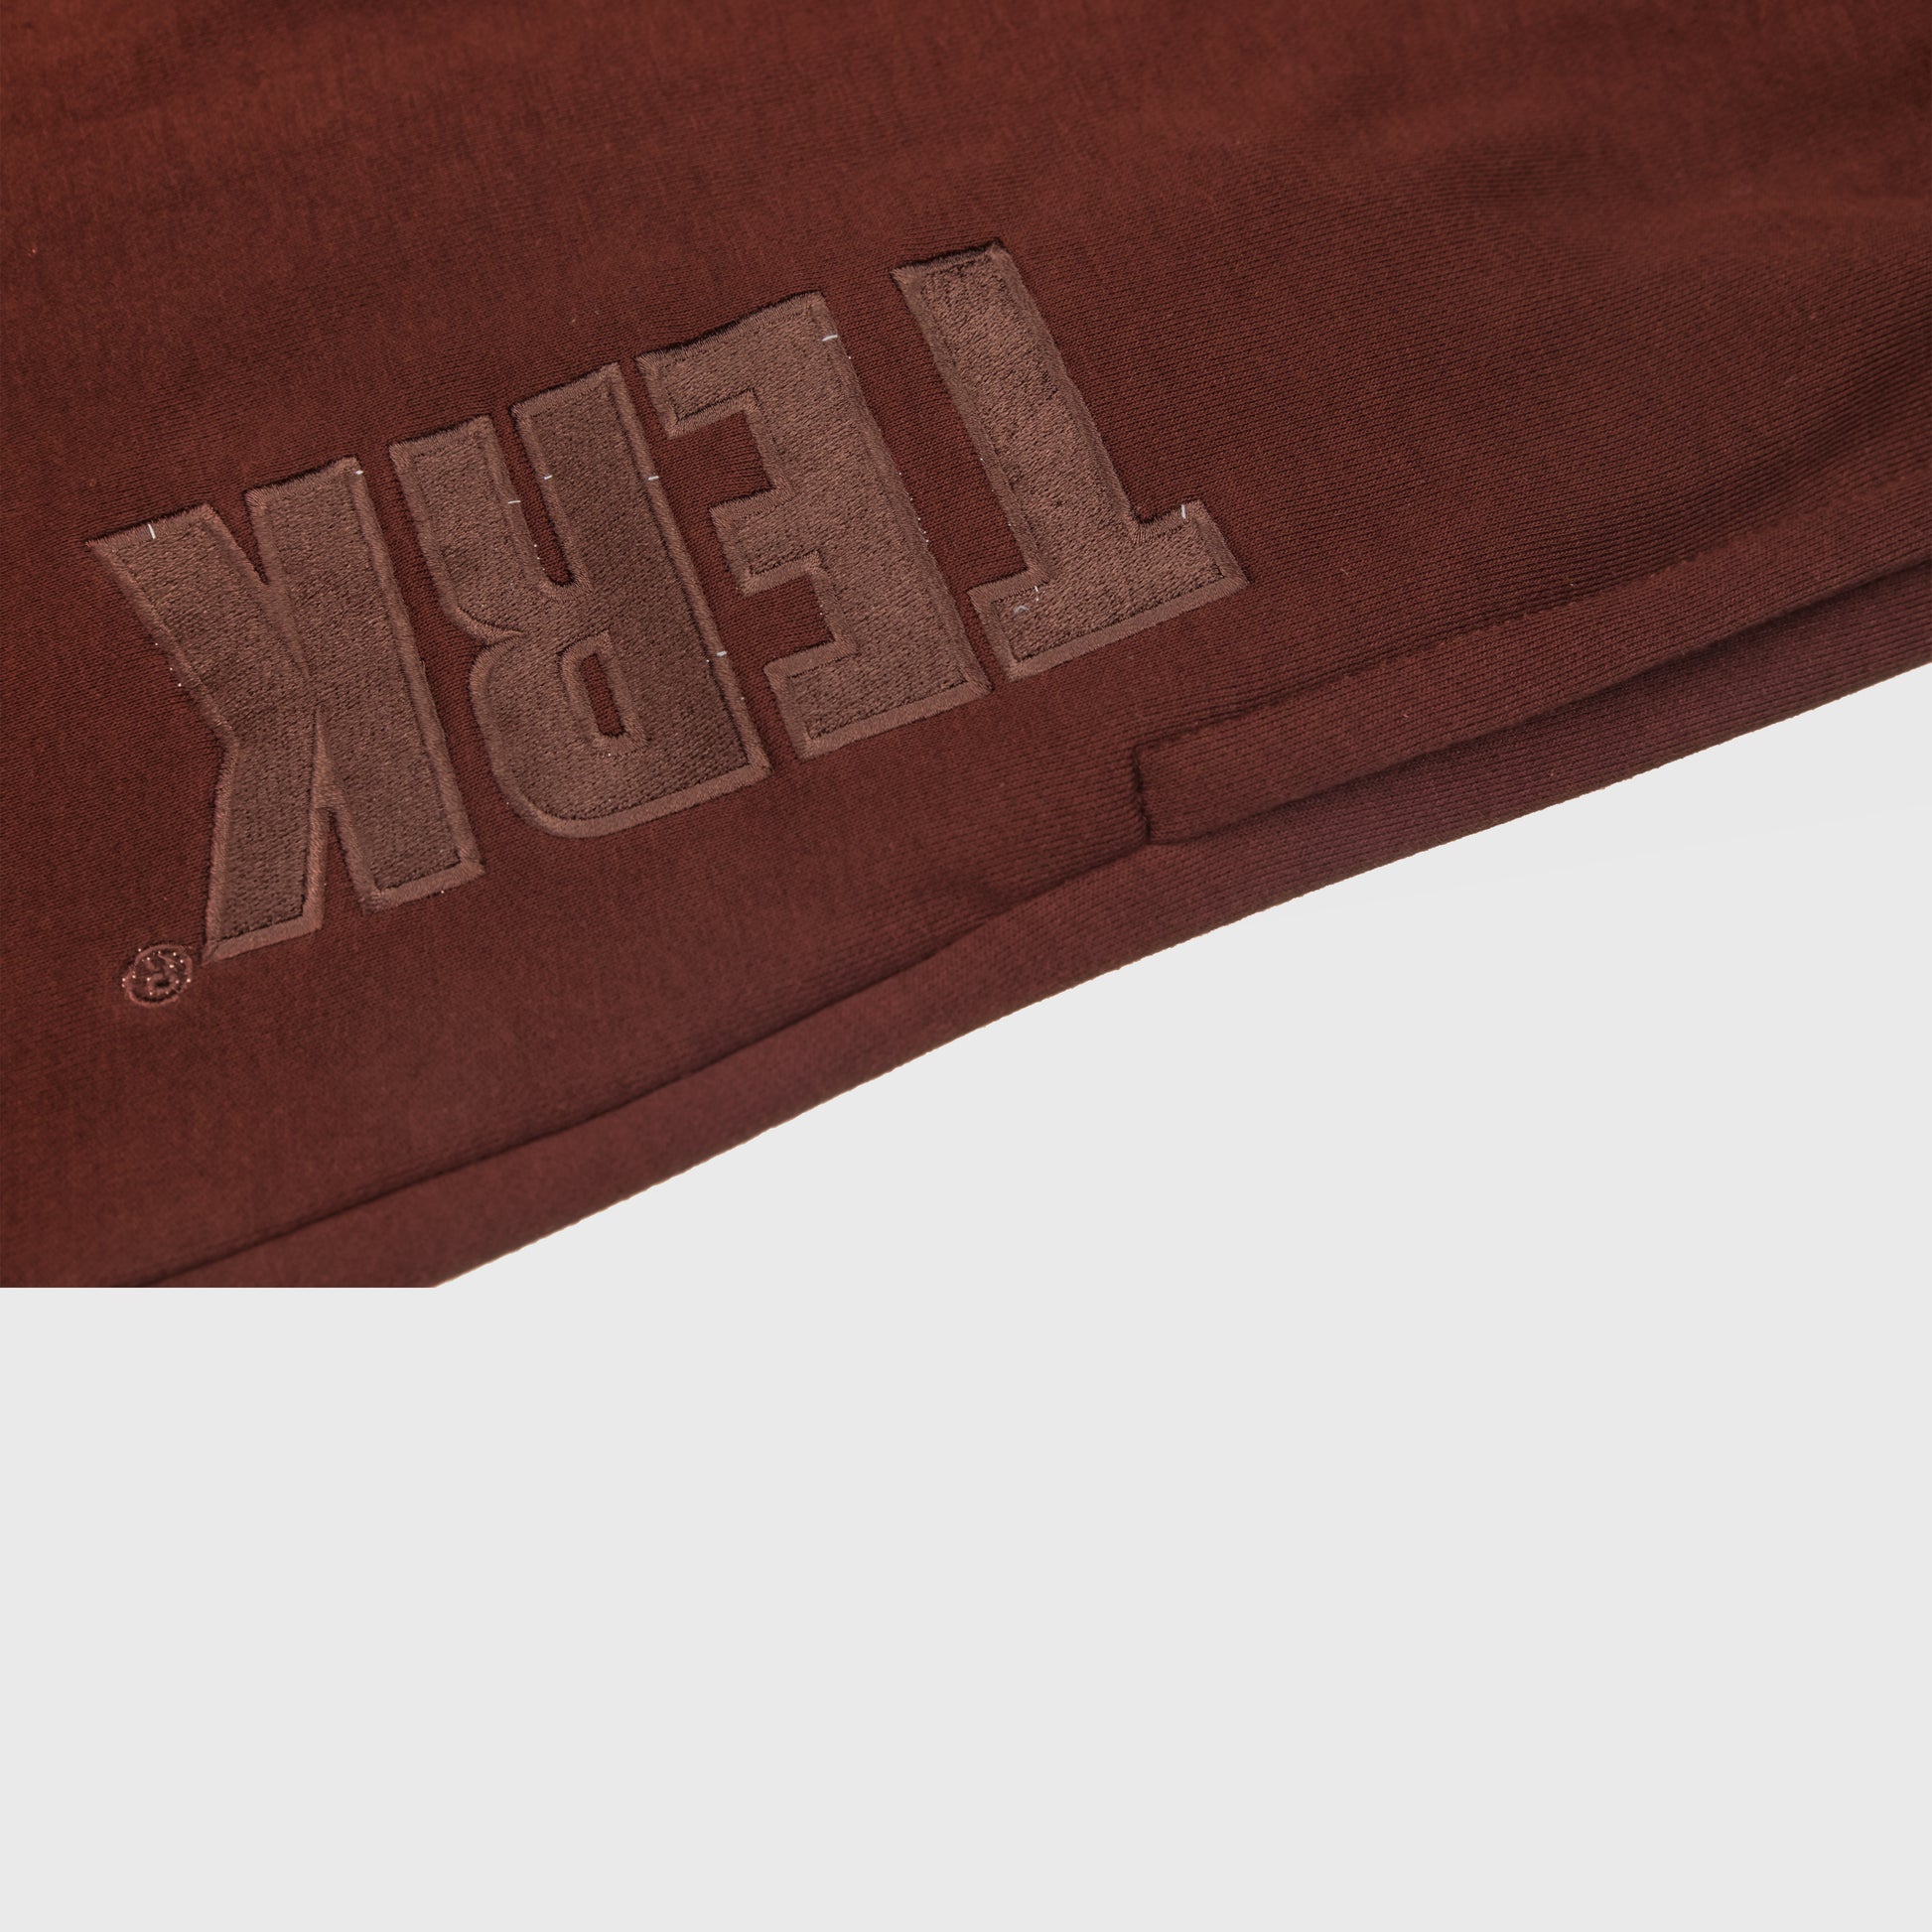 CHOCOLATE SWEATPANTS WITH BROWN TERK EMBROIDERED LOGO